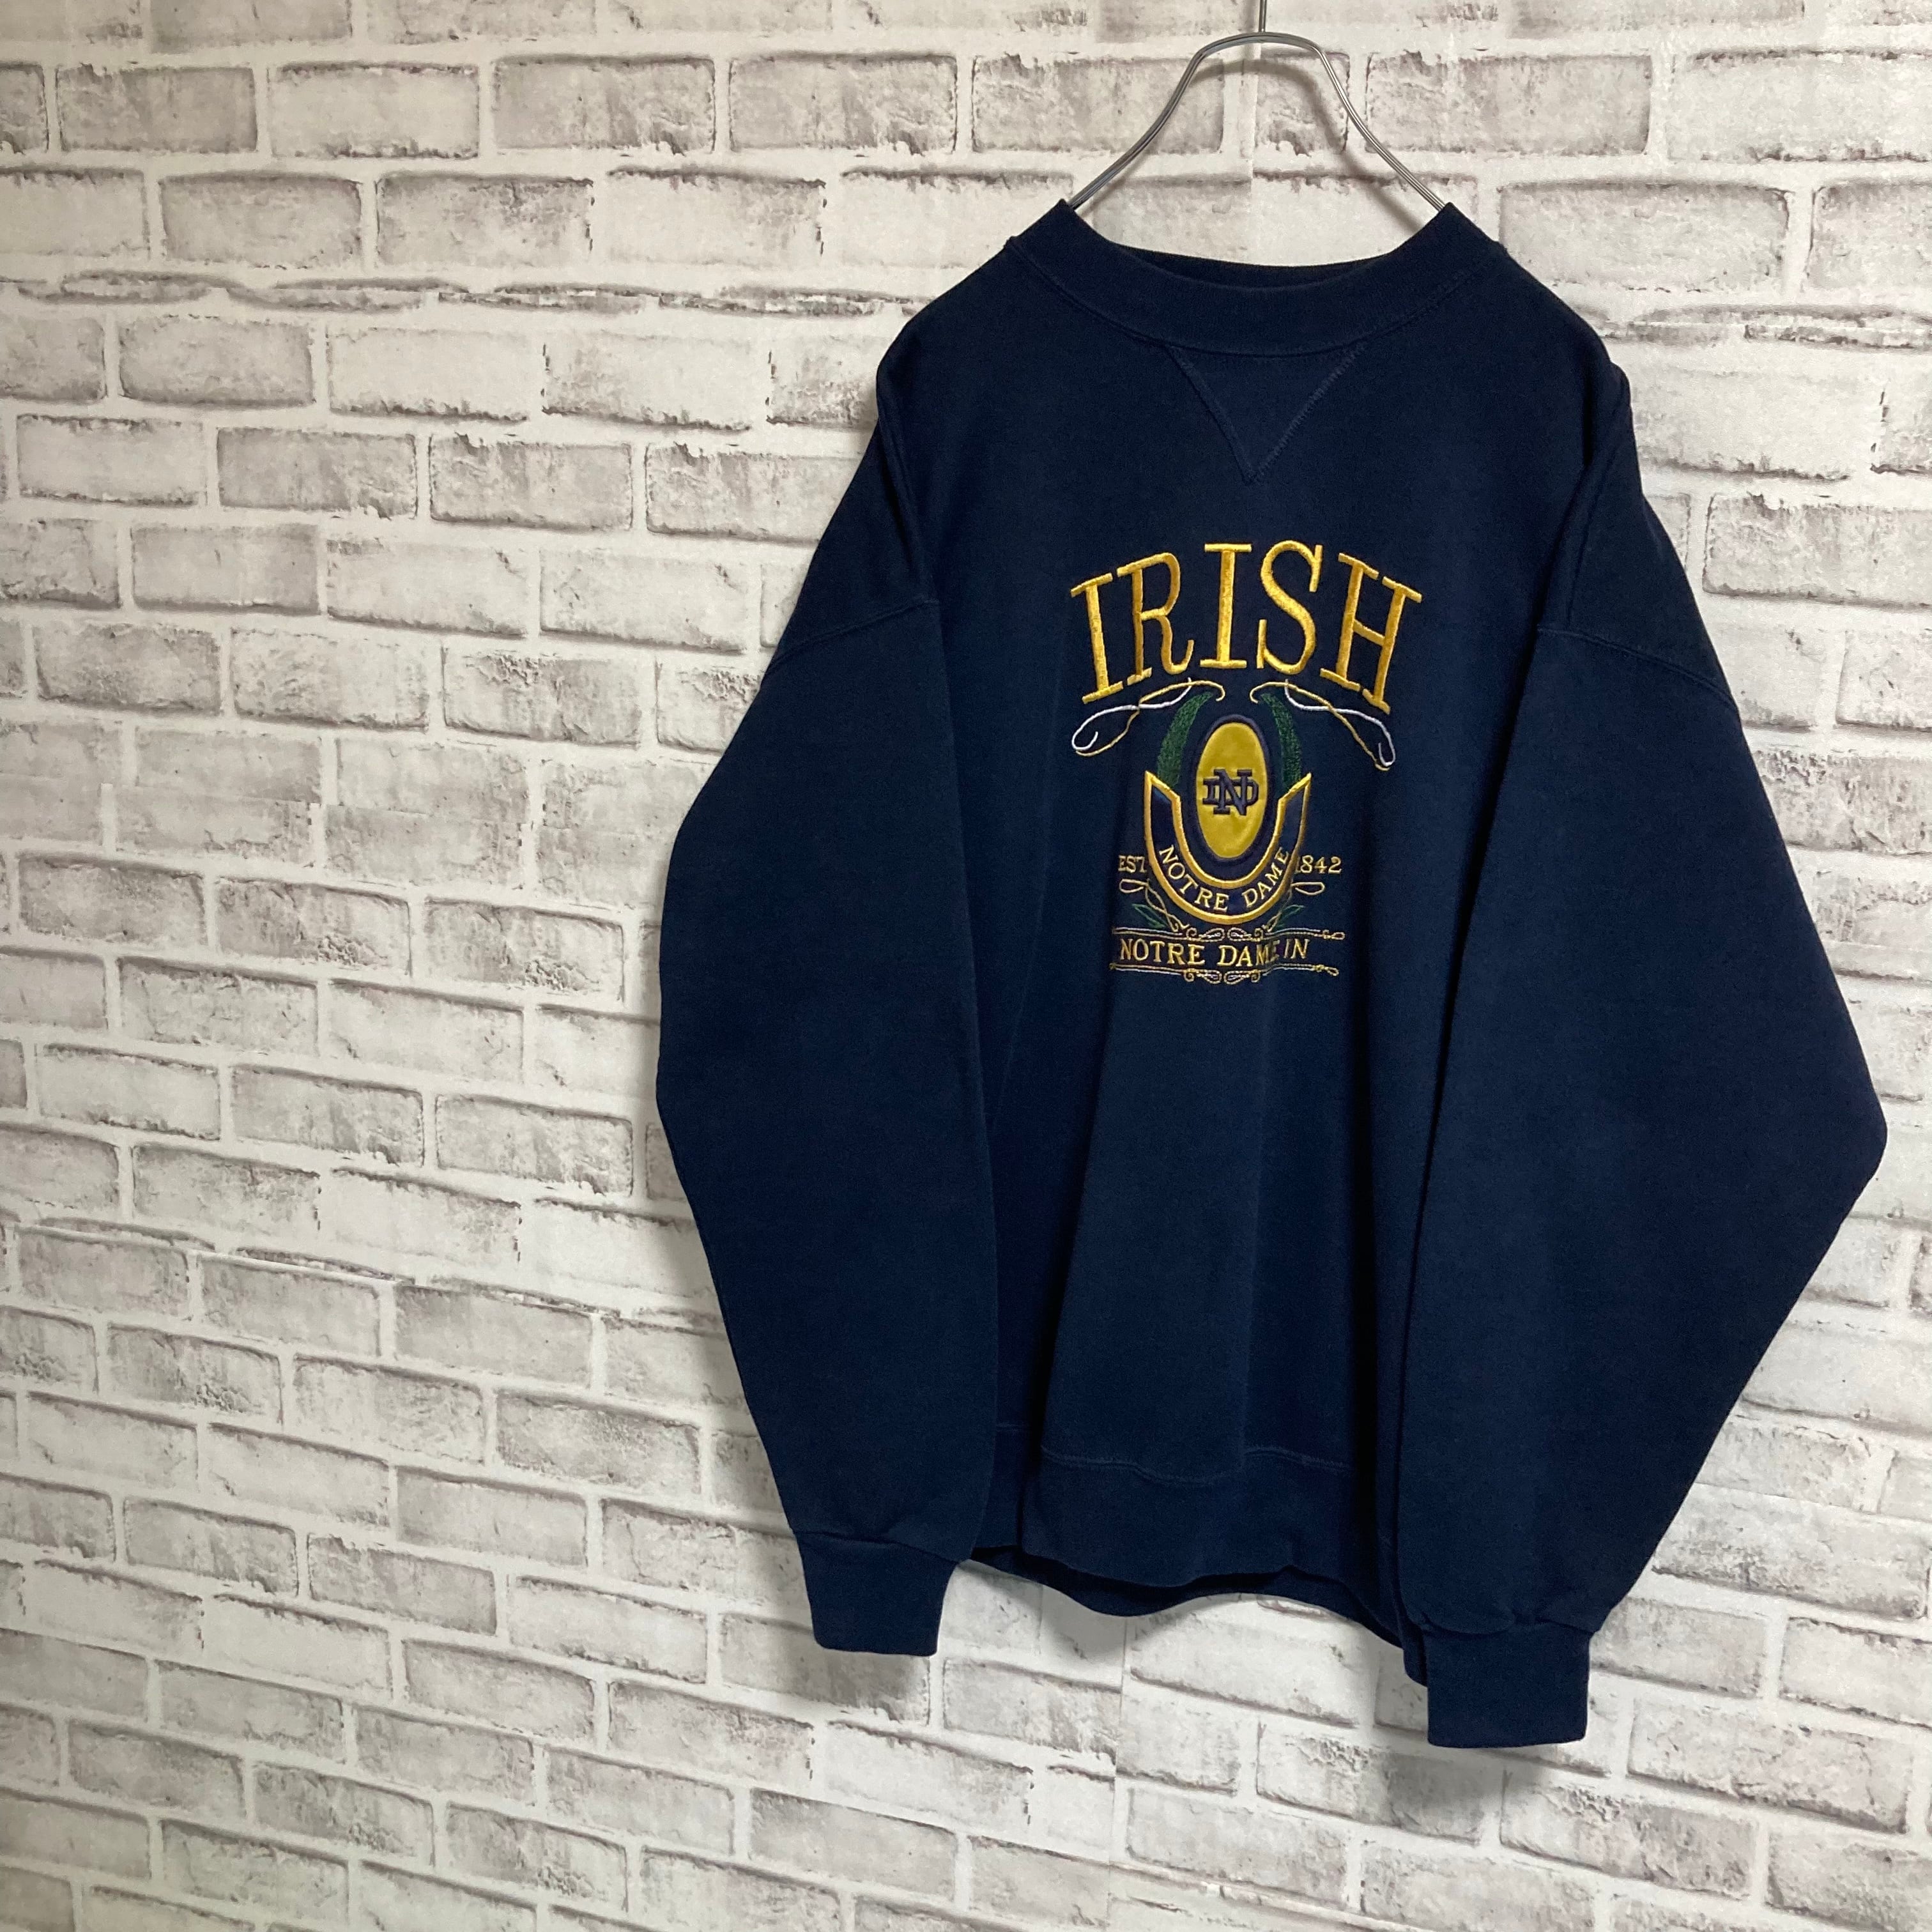 Mid west Embroidery】L/S Sweat XL Made in USA 90s “NOTRE DAME